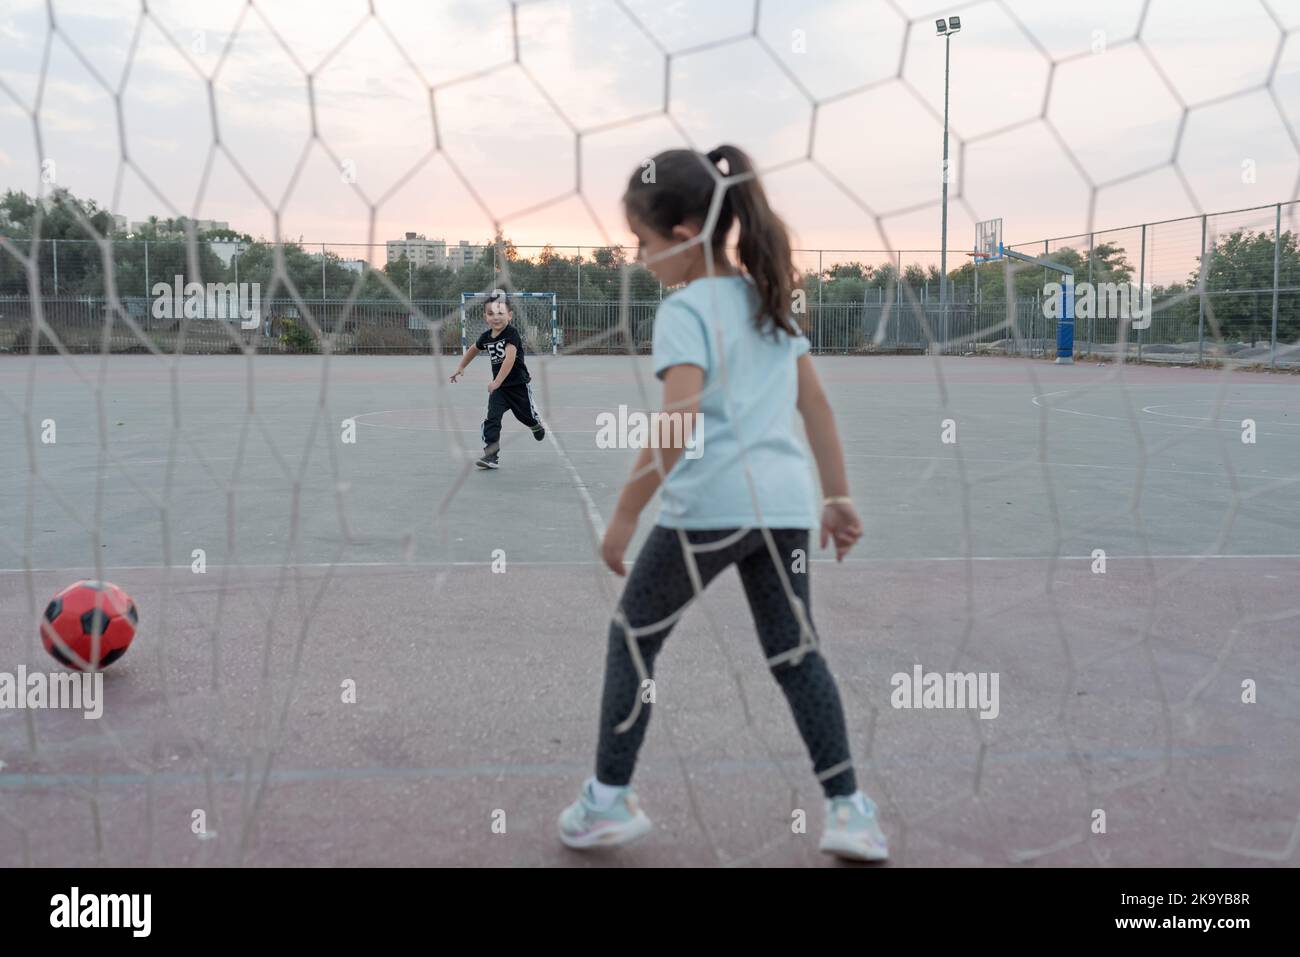 Young girl soccer goalkeeper warding the football goal. Child running for ball in soccer field. Selective focus on boy. Stock Photo